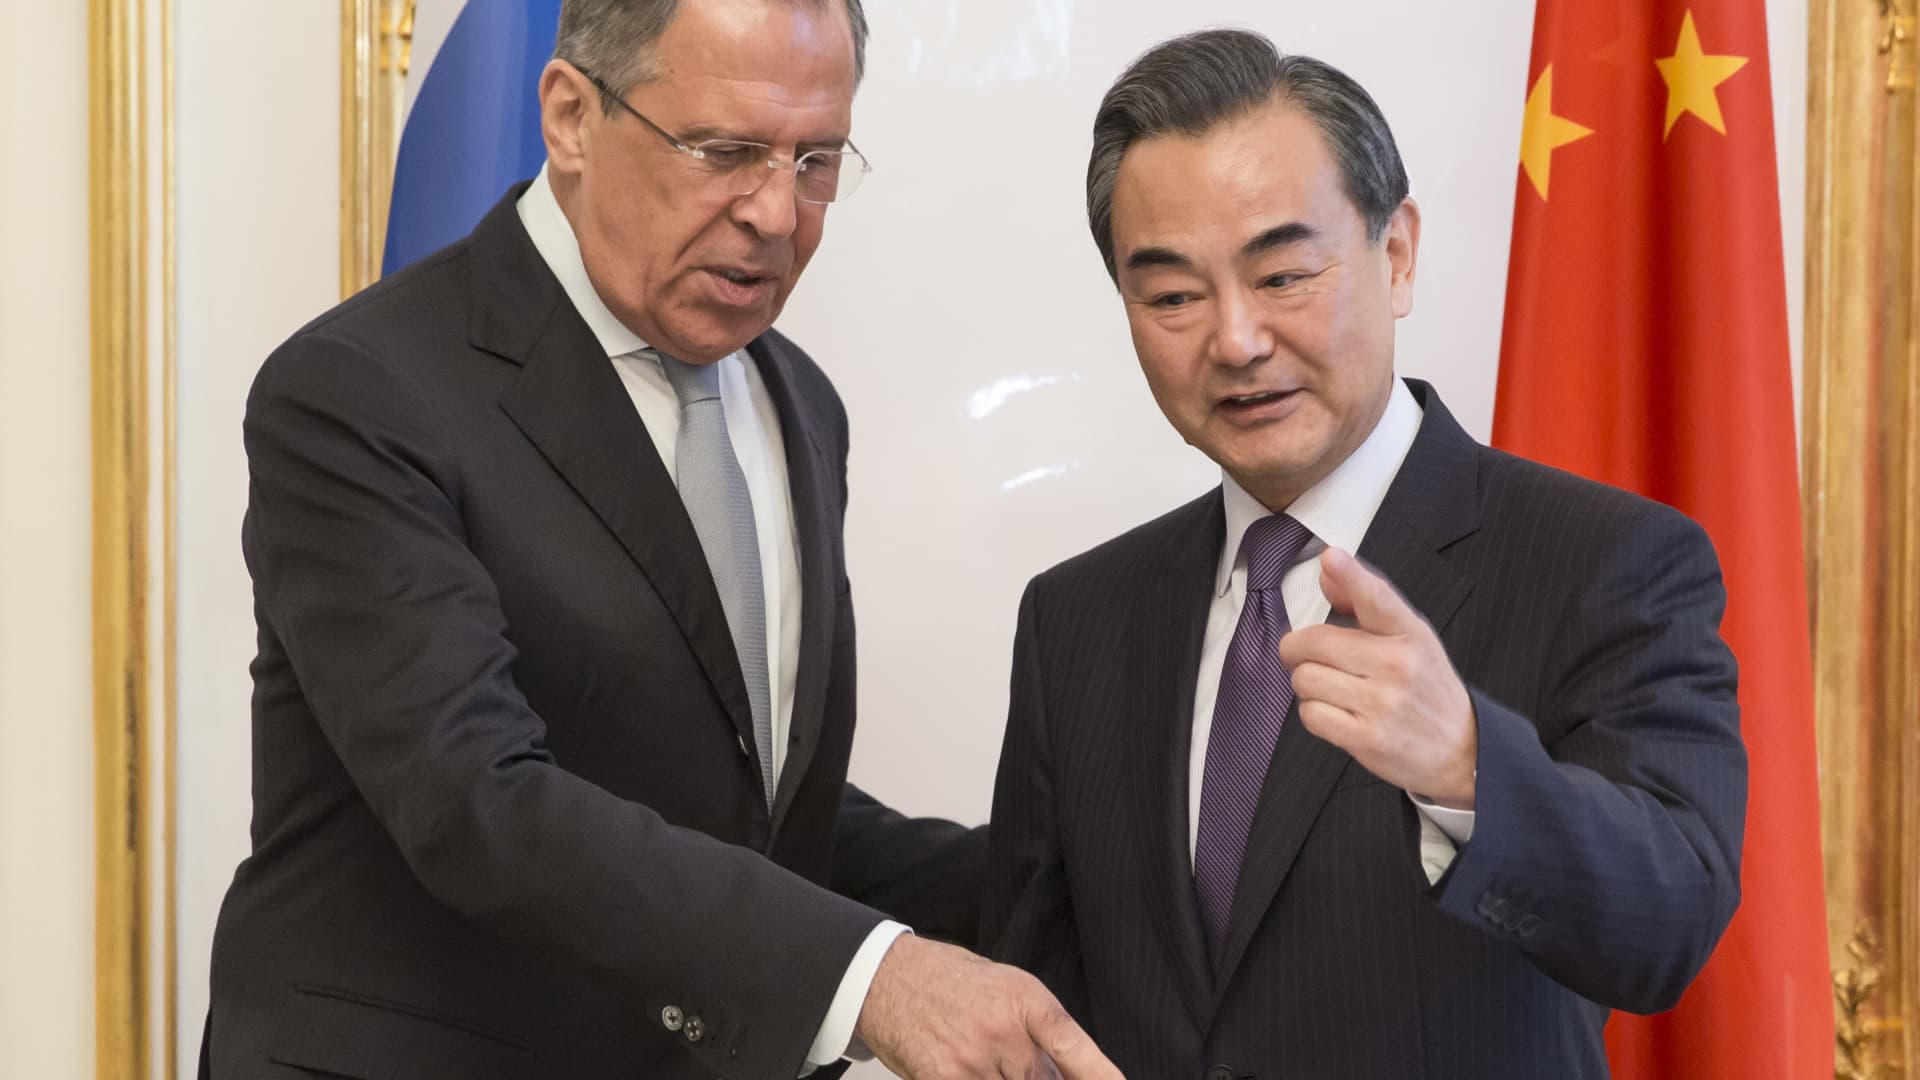 Russian Foreign Minister Sergei Lavrov (L) and Wang Yi, Foreign Minister of China, back in 2015 in Vienna, Austria. 